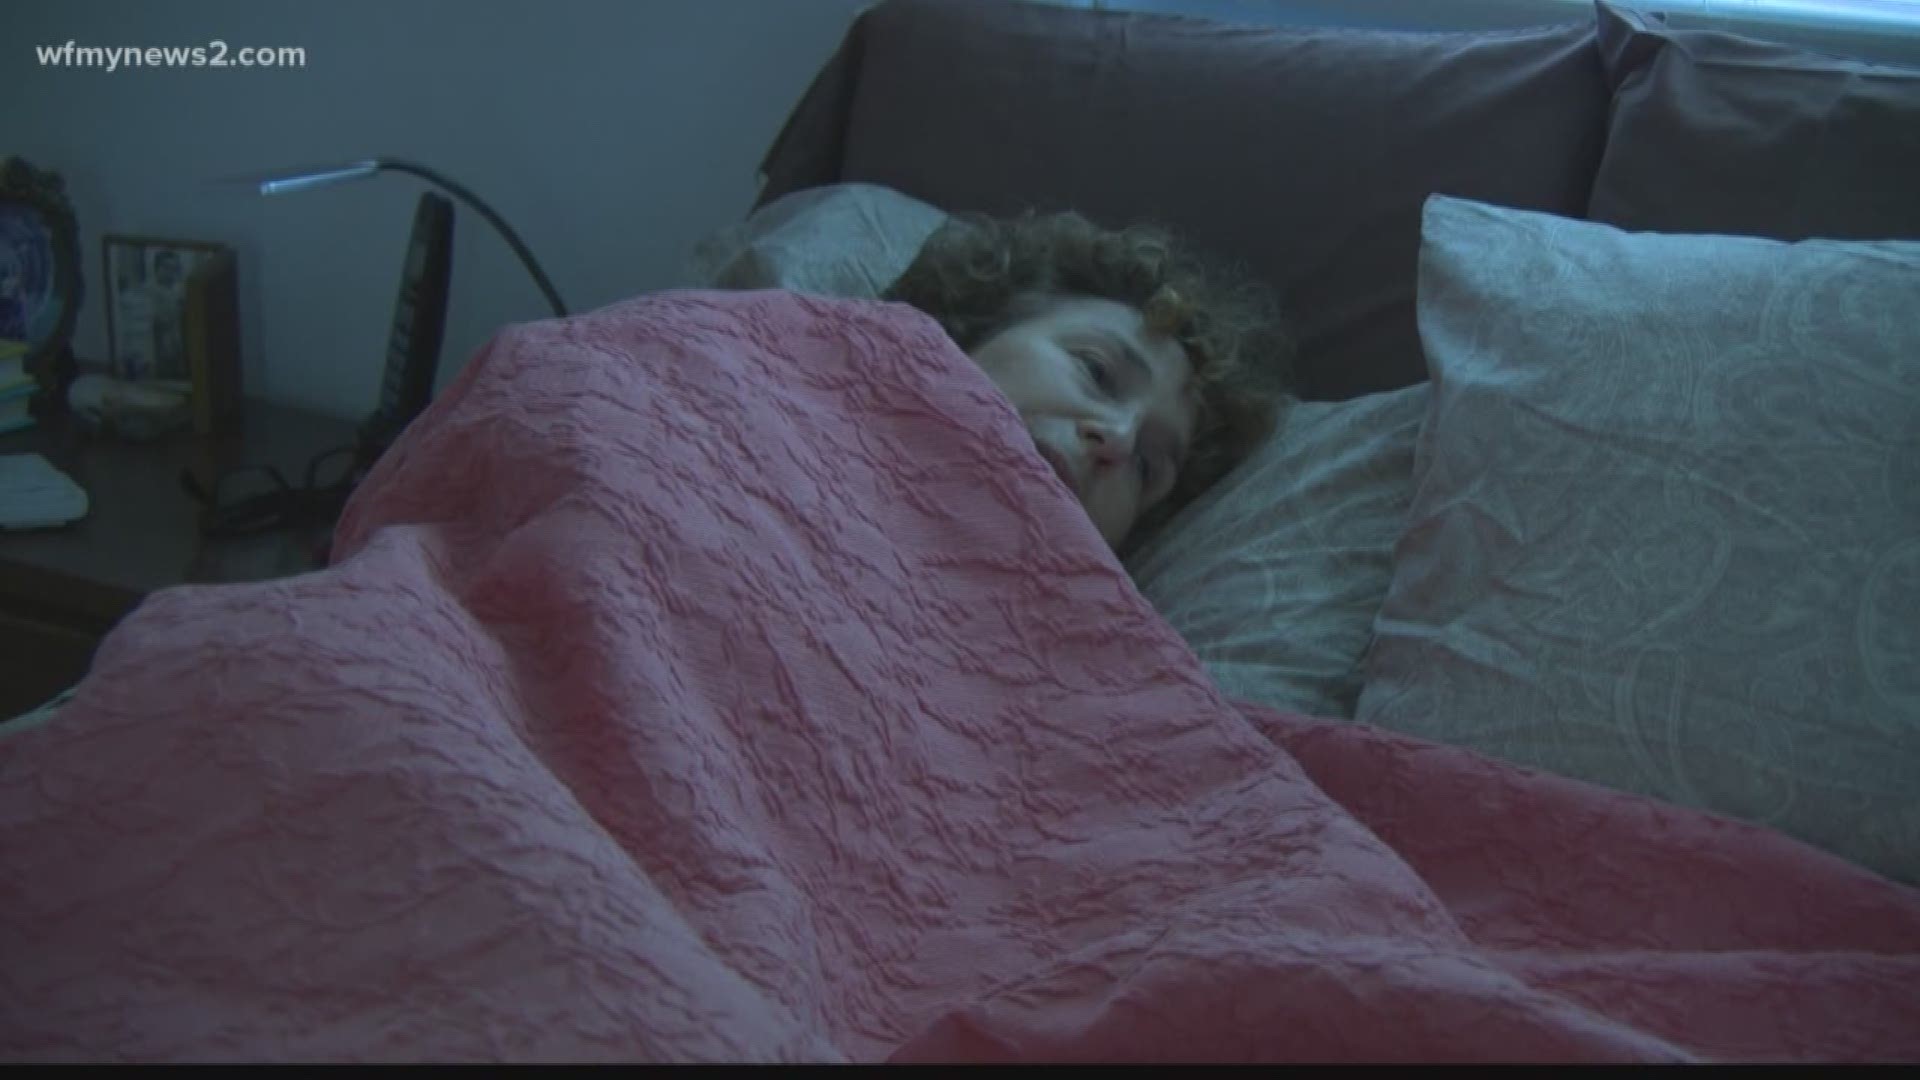 Many say the medication can help with anxiety, depression, and pain, but what about insomnia?